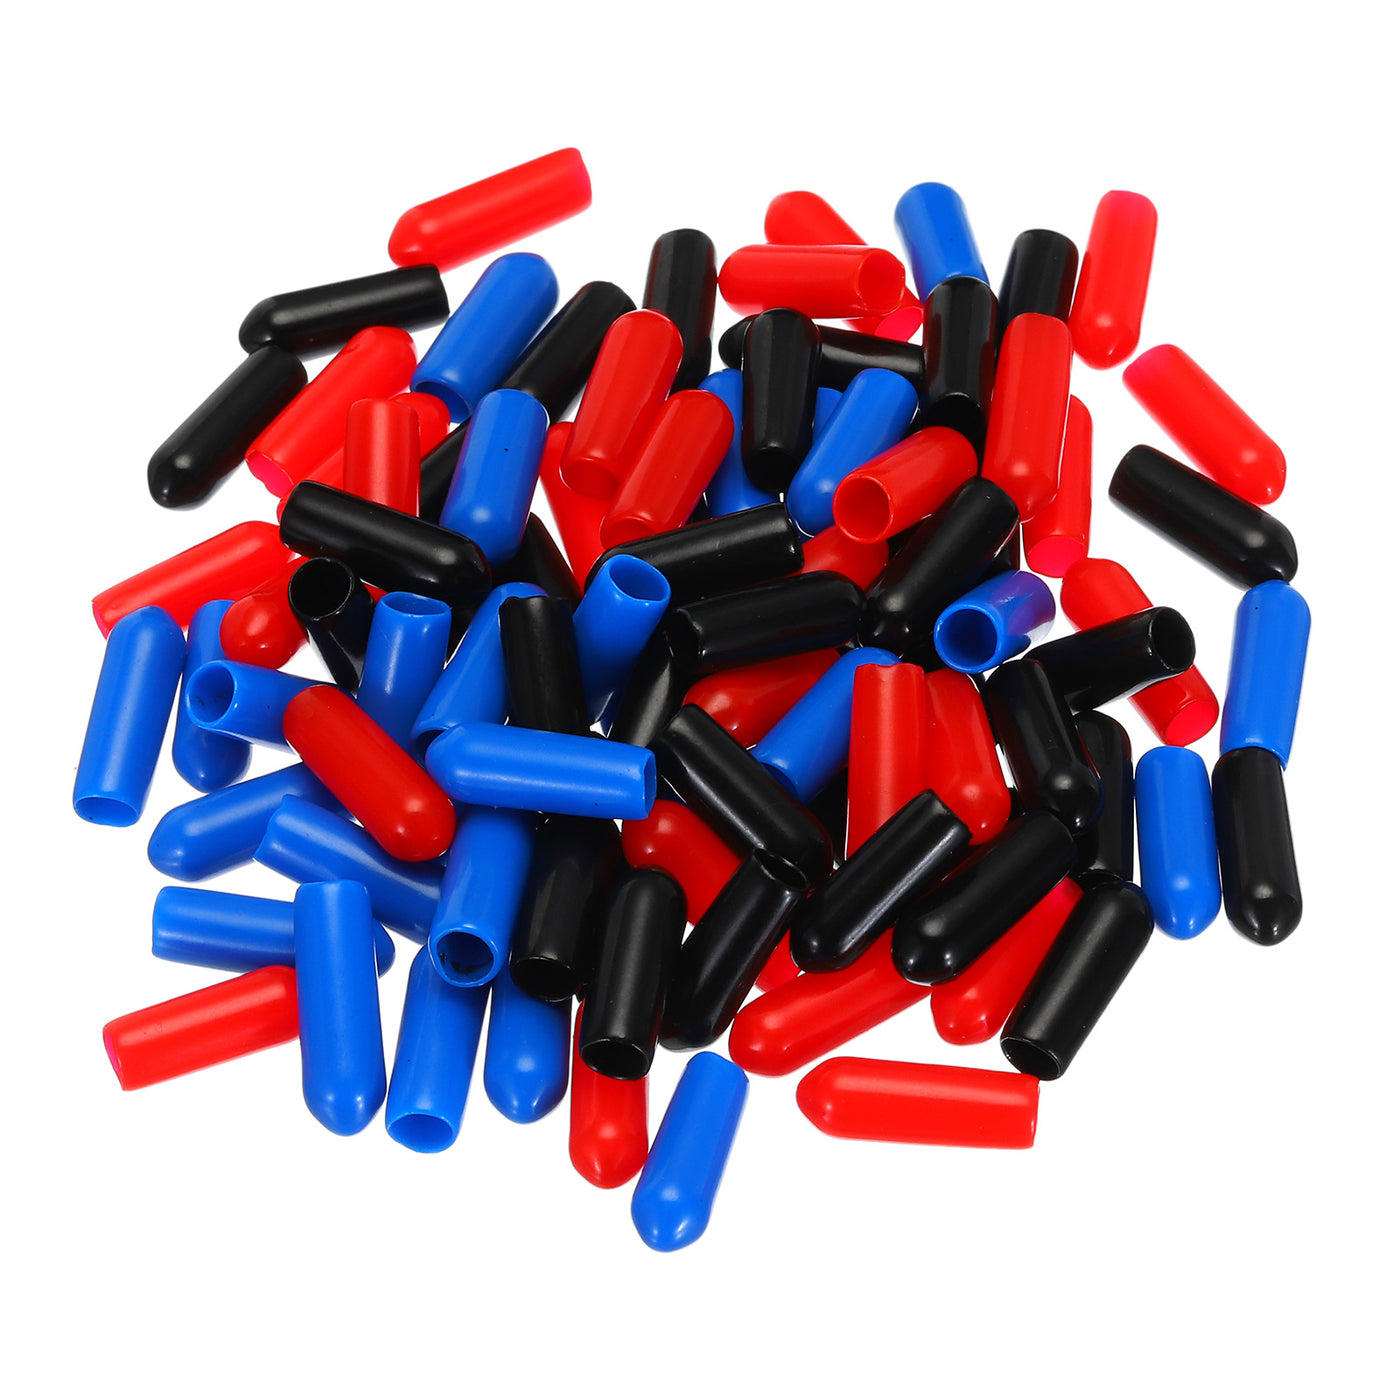 uxcell Uxcell 180pcs Rubber End Caps 5.5mm ID Vinyl PVC Round Tube Bolt Cap Cover Screw Thread Protectors, Black Red Blue